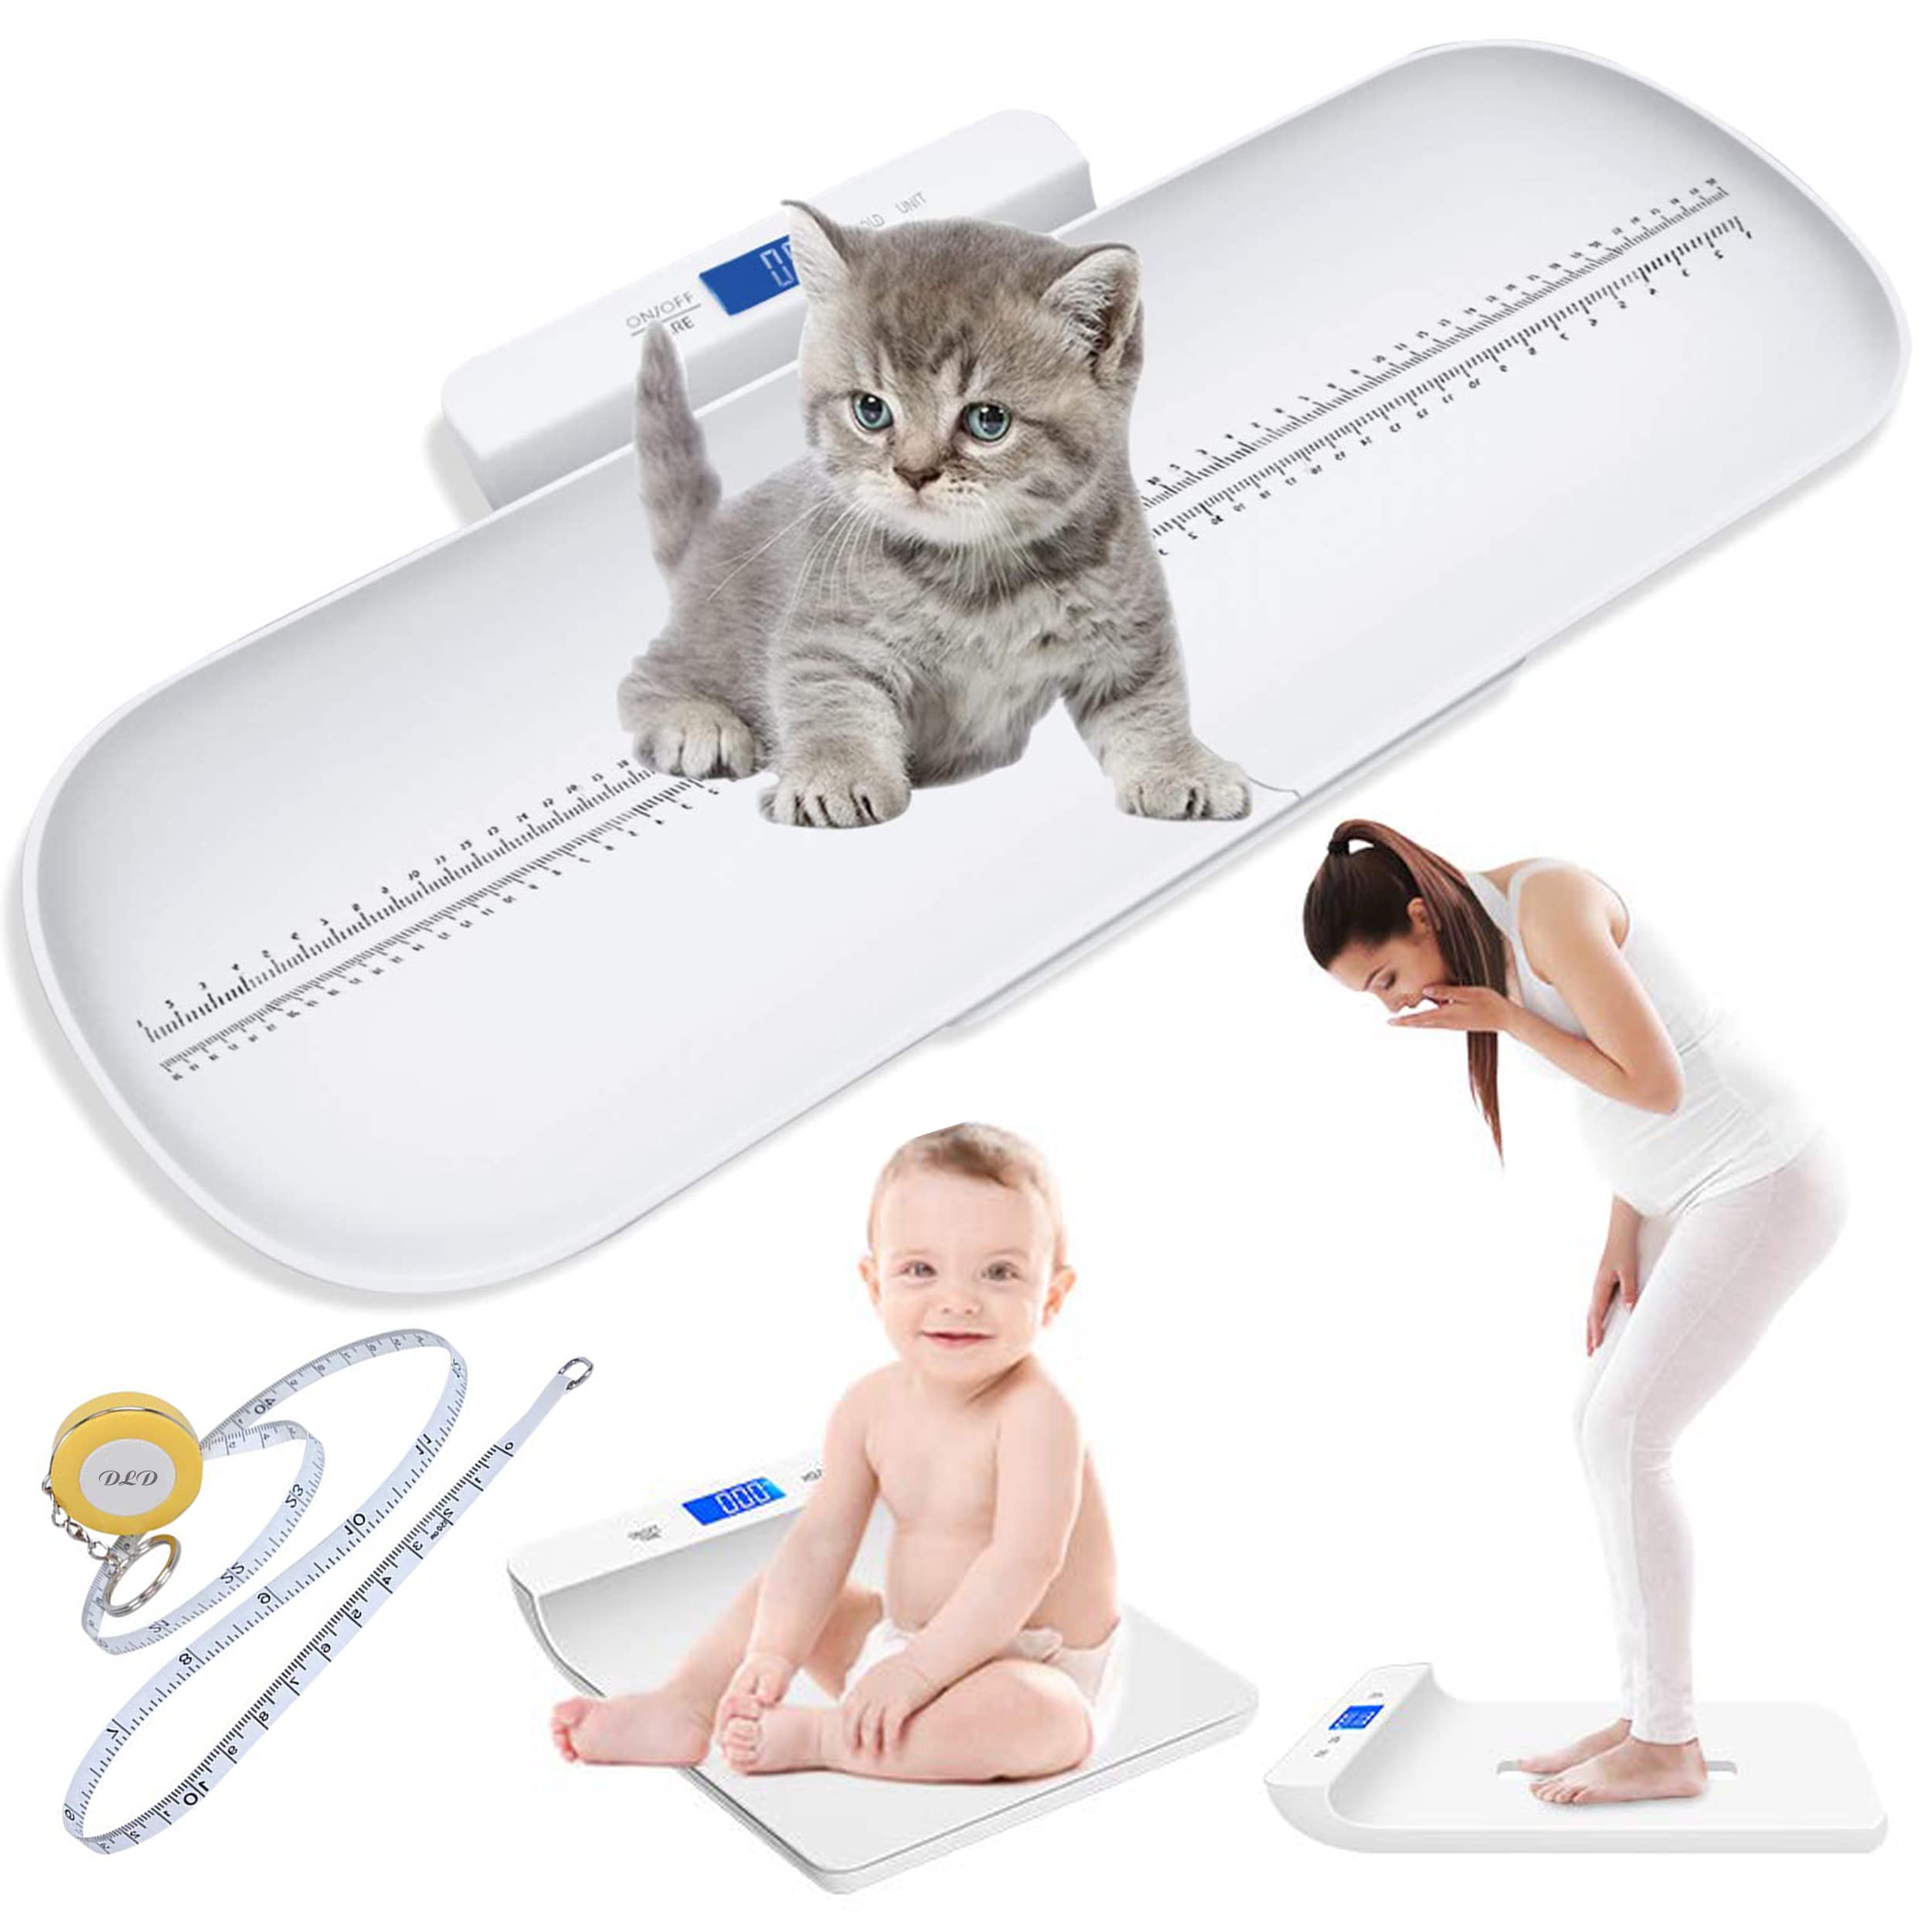  Daehung Industries Baby Weighing Scale